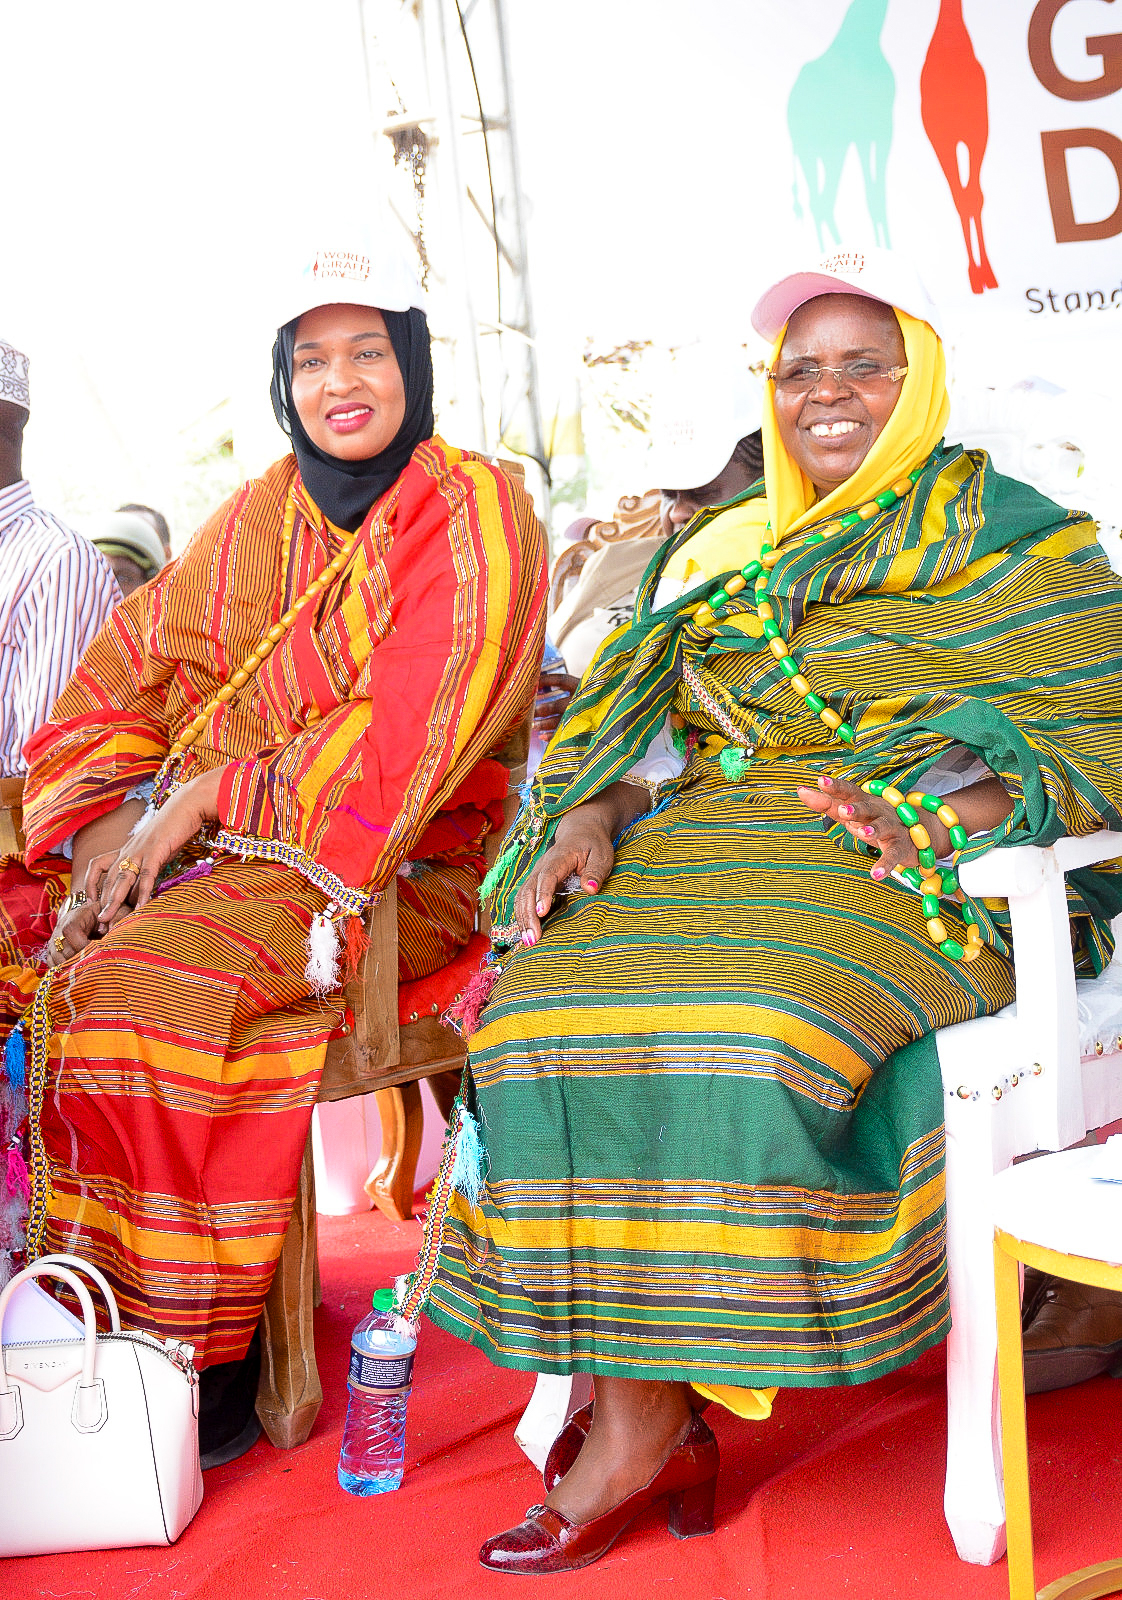 The Cabinet Secretary, Hon. Peninah Malonza, with the Principal Secretary, State Department for Culture and Heritage, Ms. Ummi Bashir, during the World Giraffe Day celebrations, in Habaswein, Wajir County.